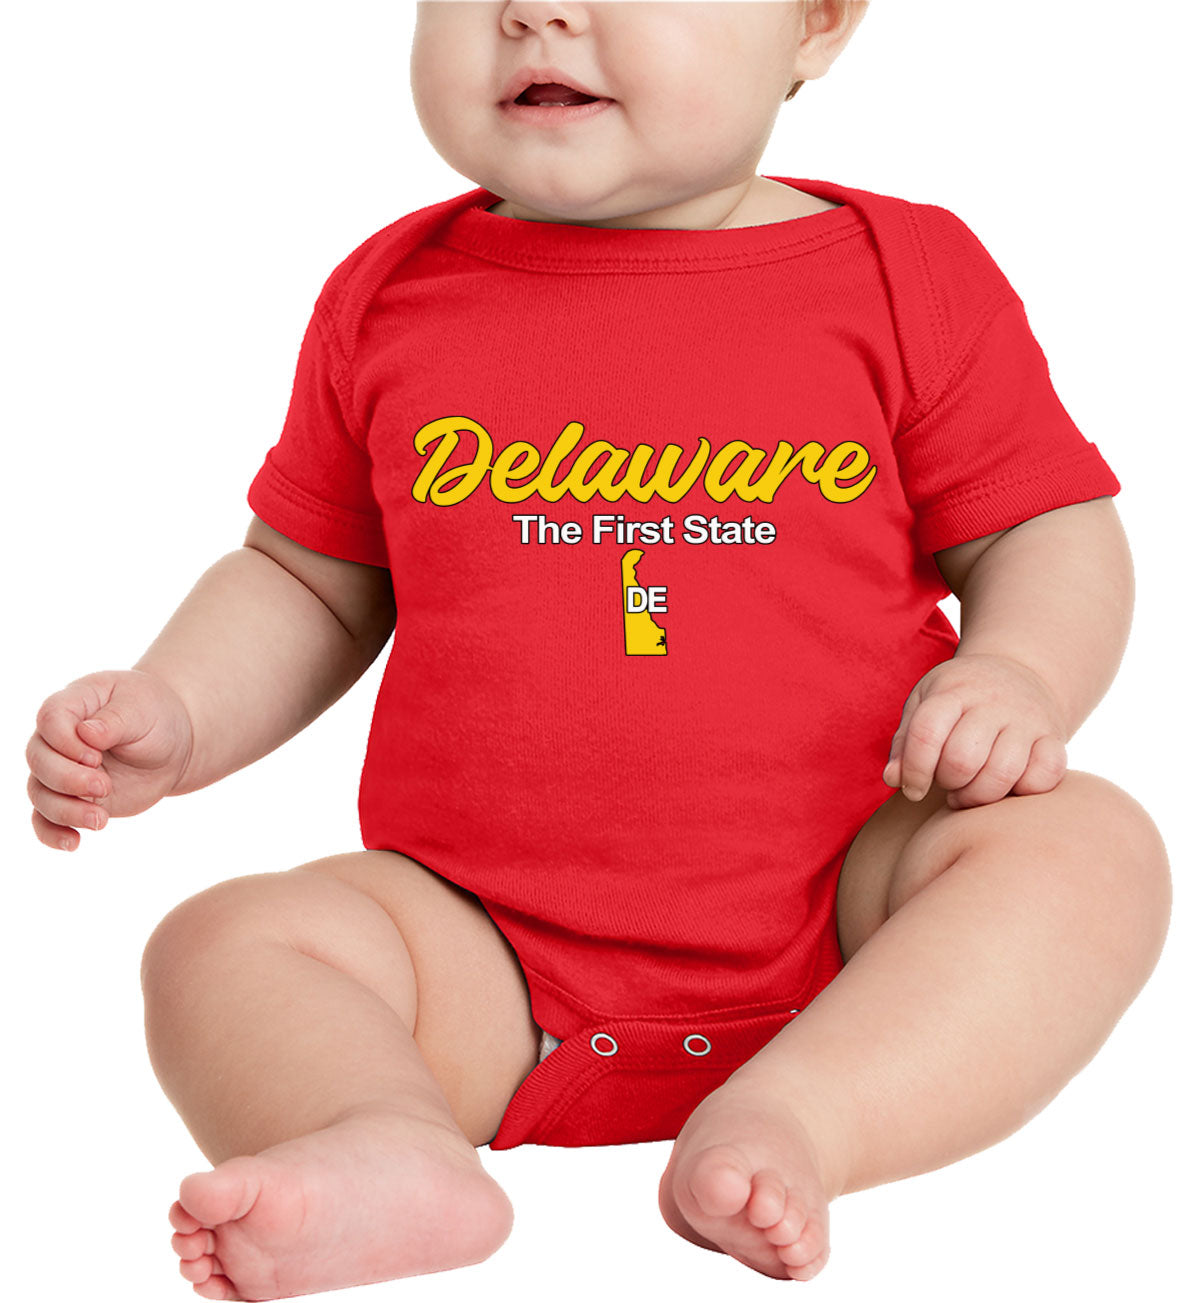 Delaware The First State Baby Onesie